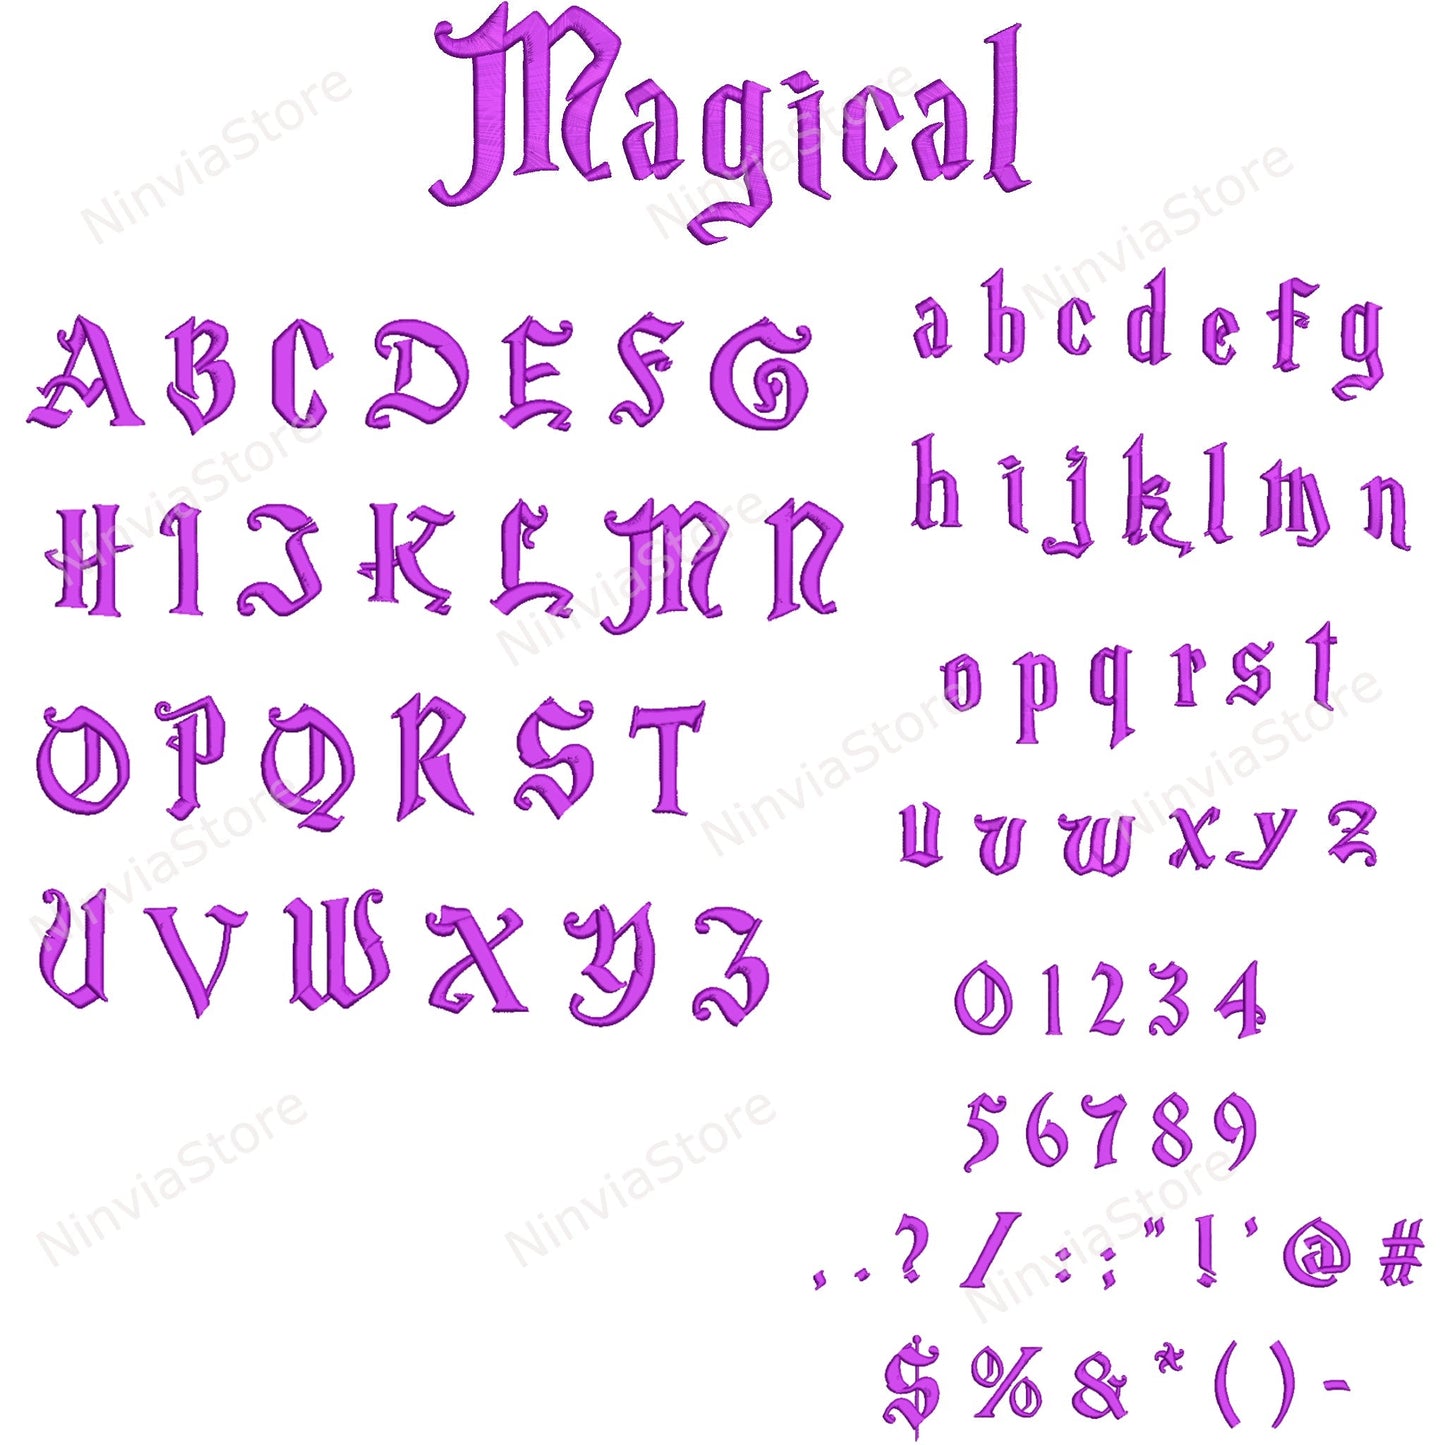 7 HUS Halloween Embroidery Fonts Bundle, Kids Font HUS, Machine Embroidery Font HUS, Monster HUS font for Embroidery